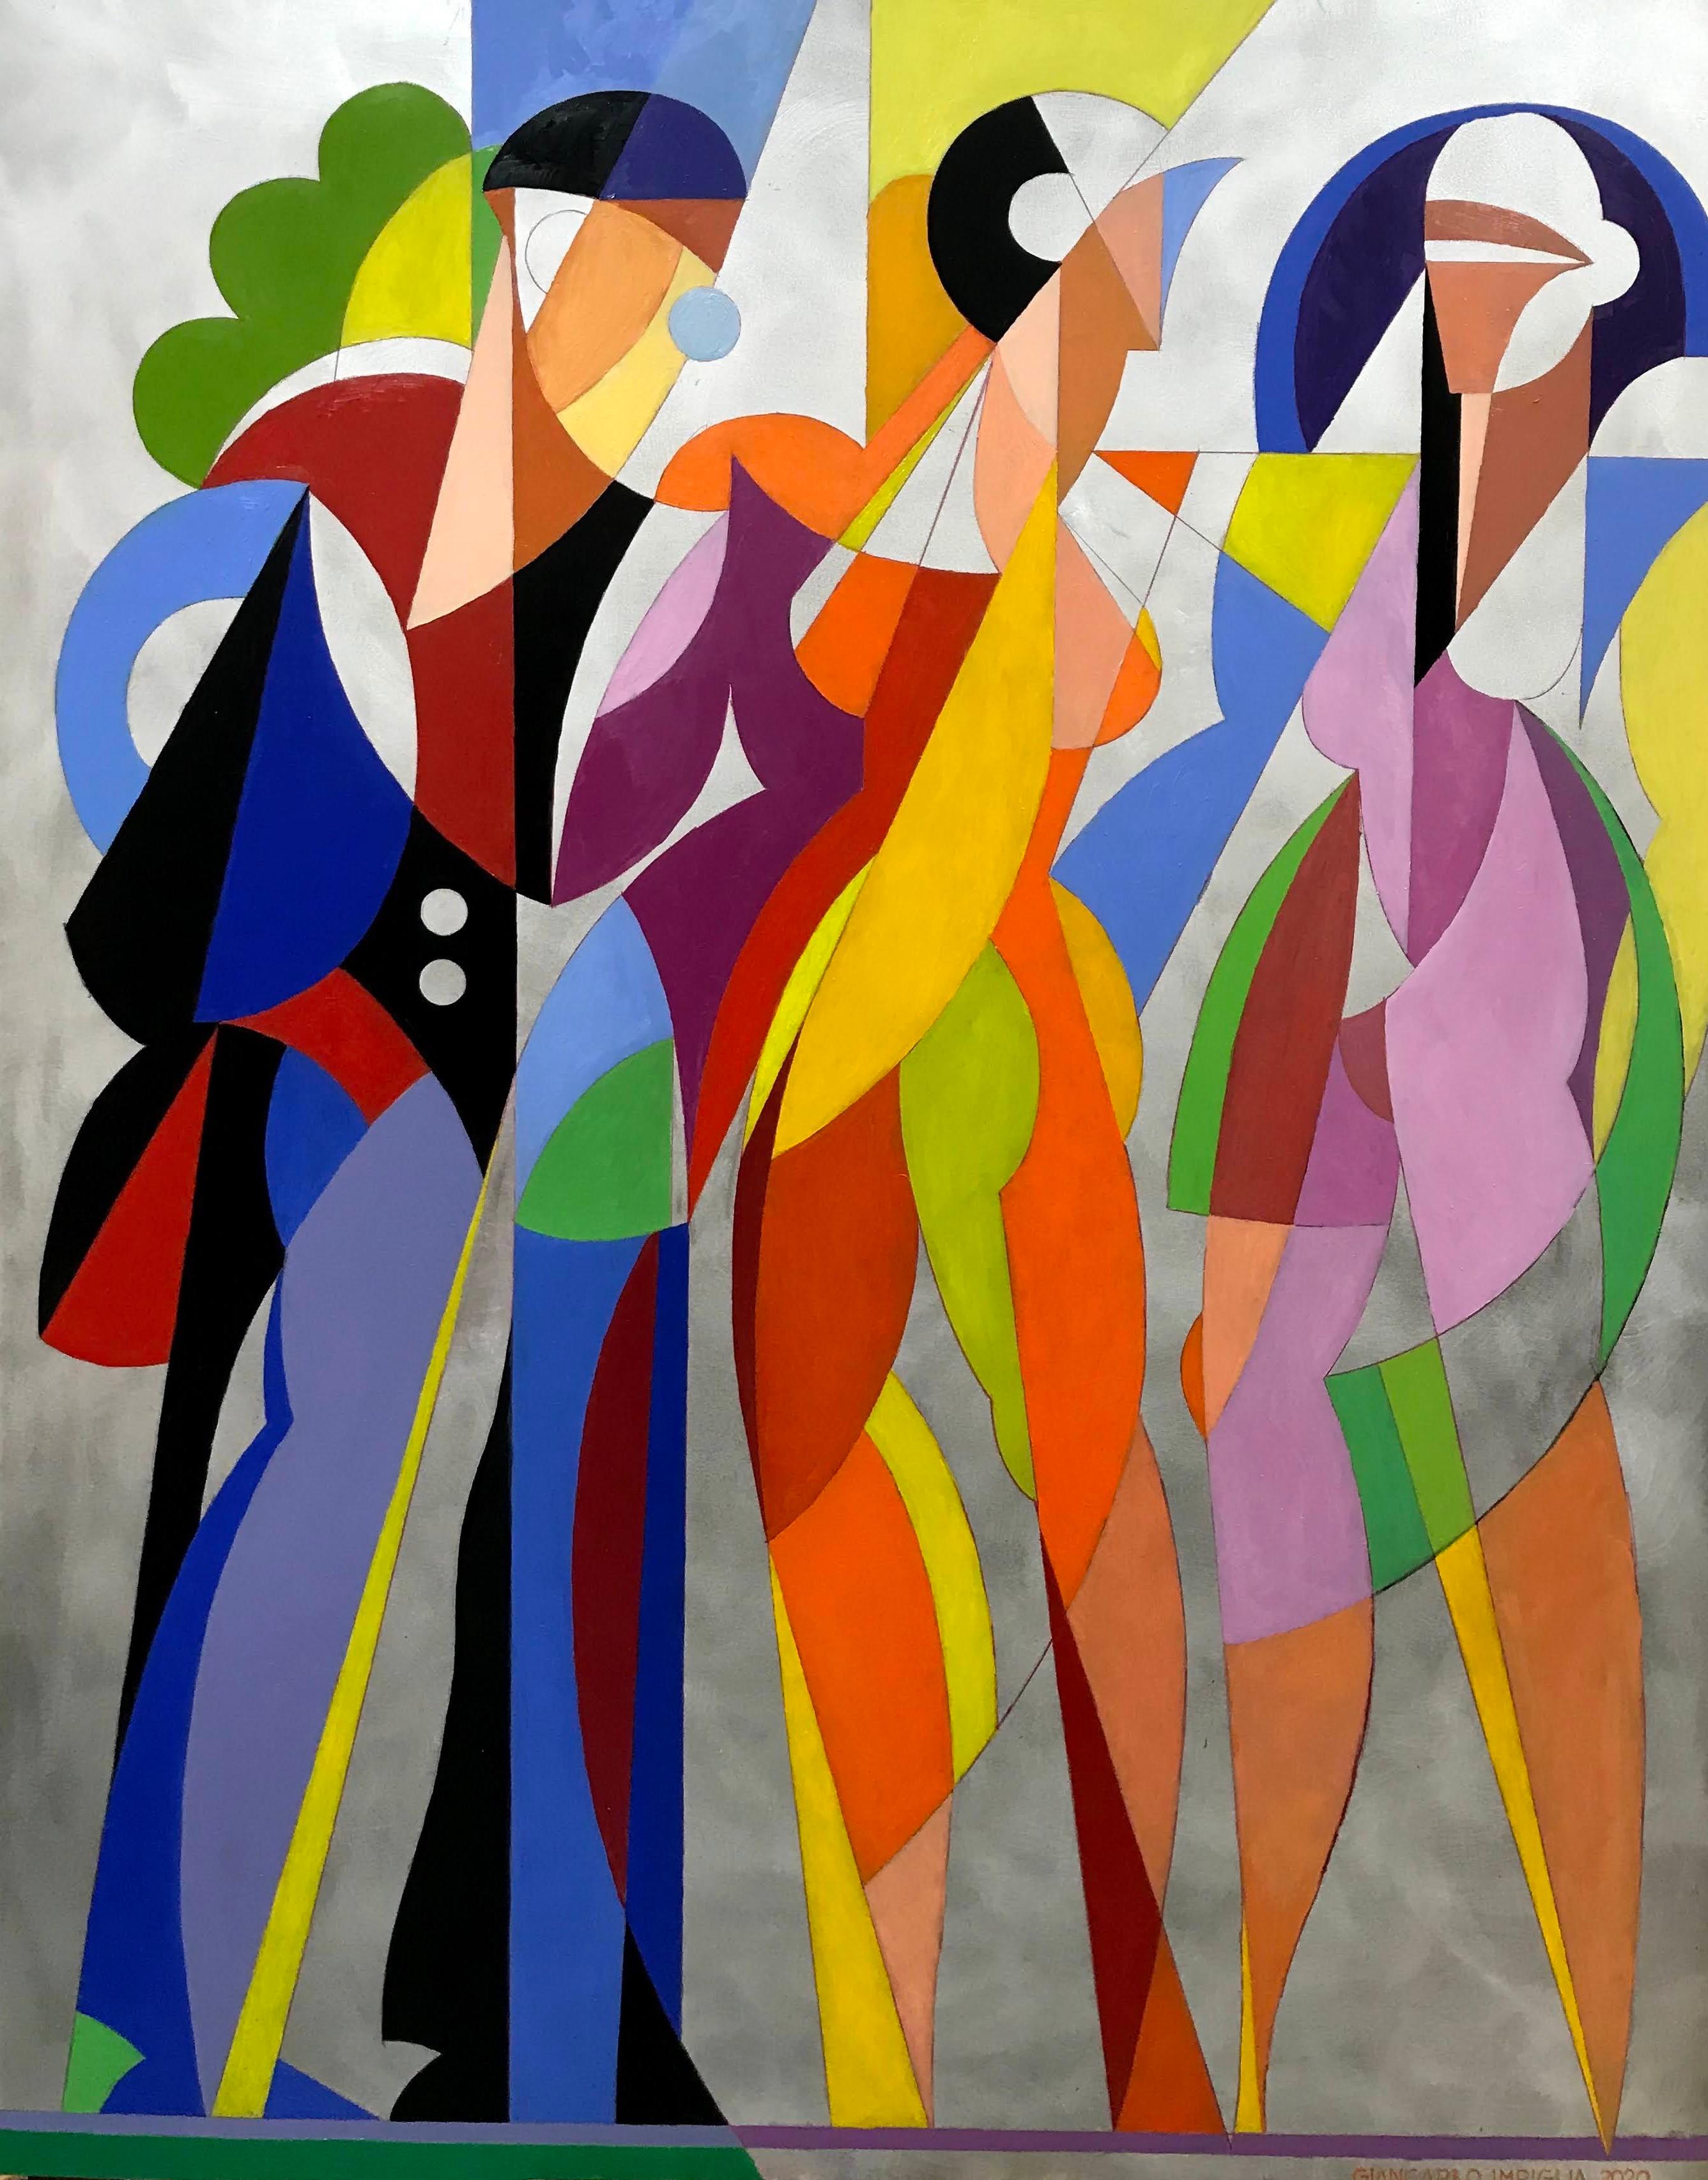 Giancarlo Impiglia Abstract Painting - Figurative, pop art oil painting, "Fortuitous Encounters"